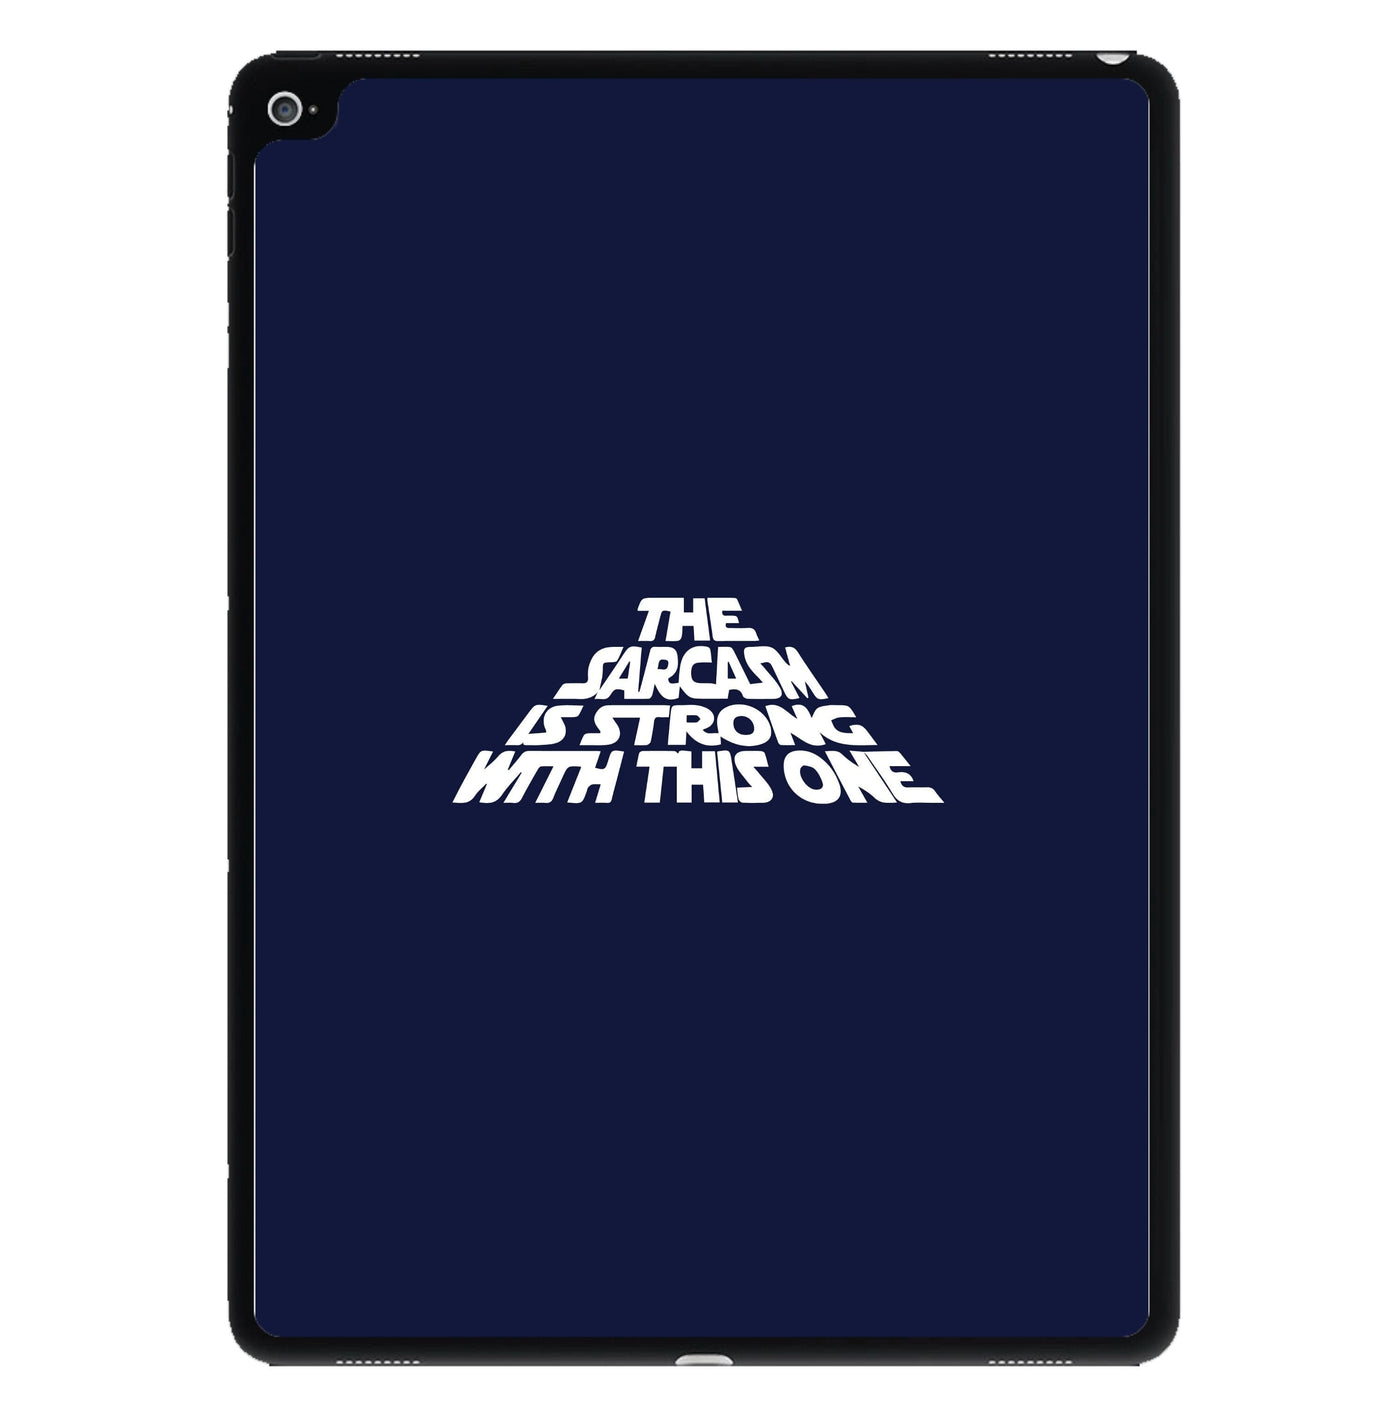 The Sarcasm Is Strong With This One - Star Wars iPad Case